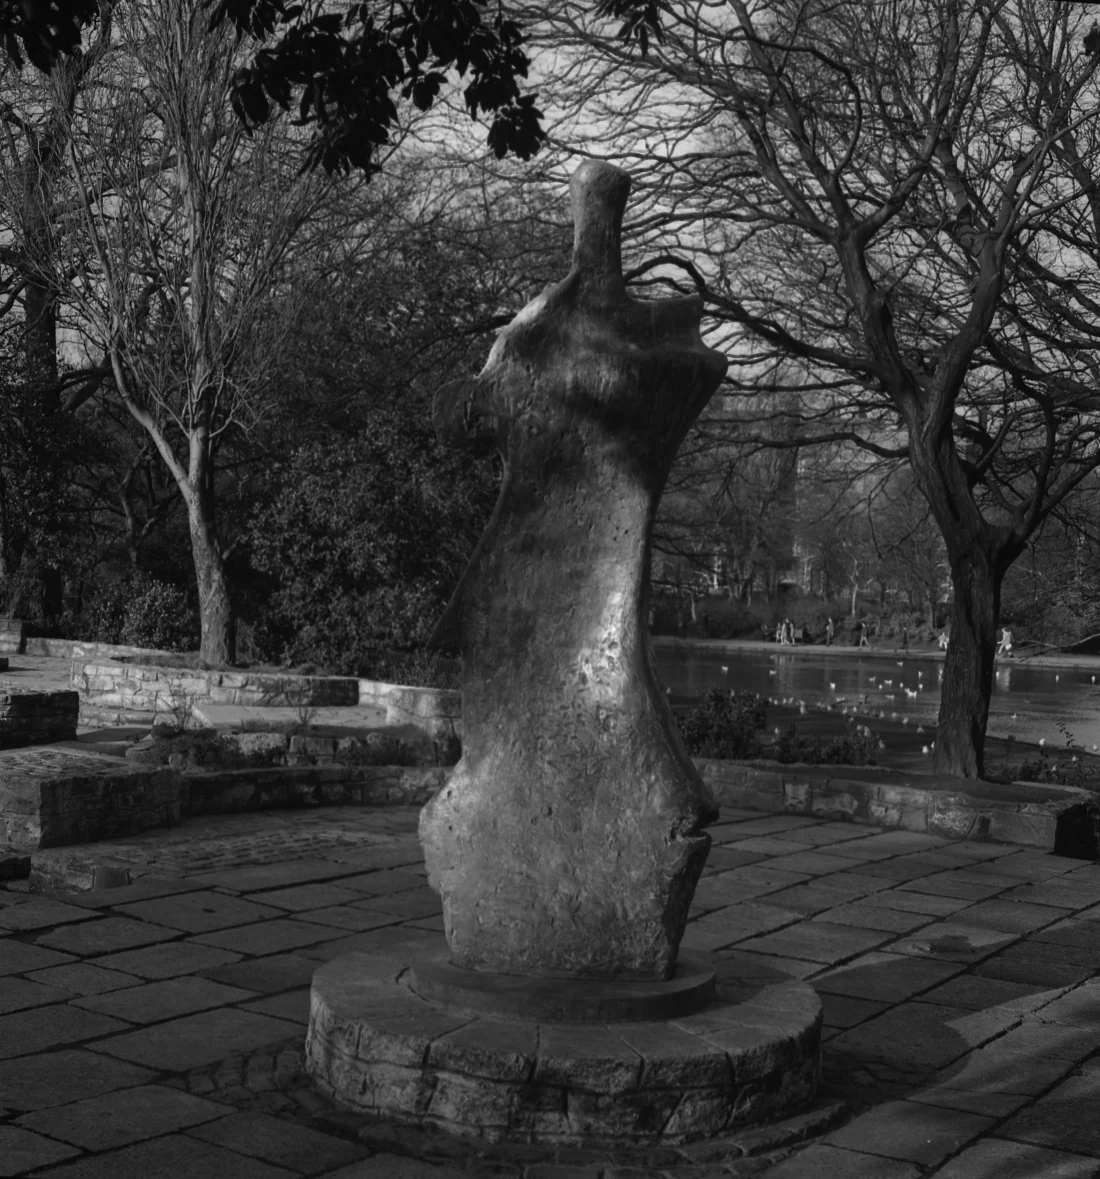 black and white photograph of a sculpture in a park